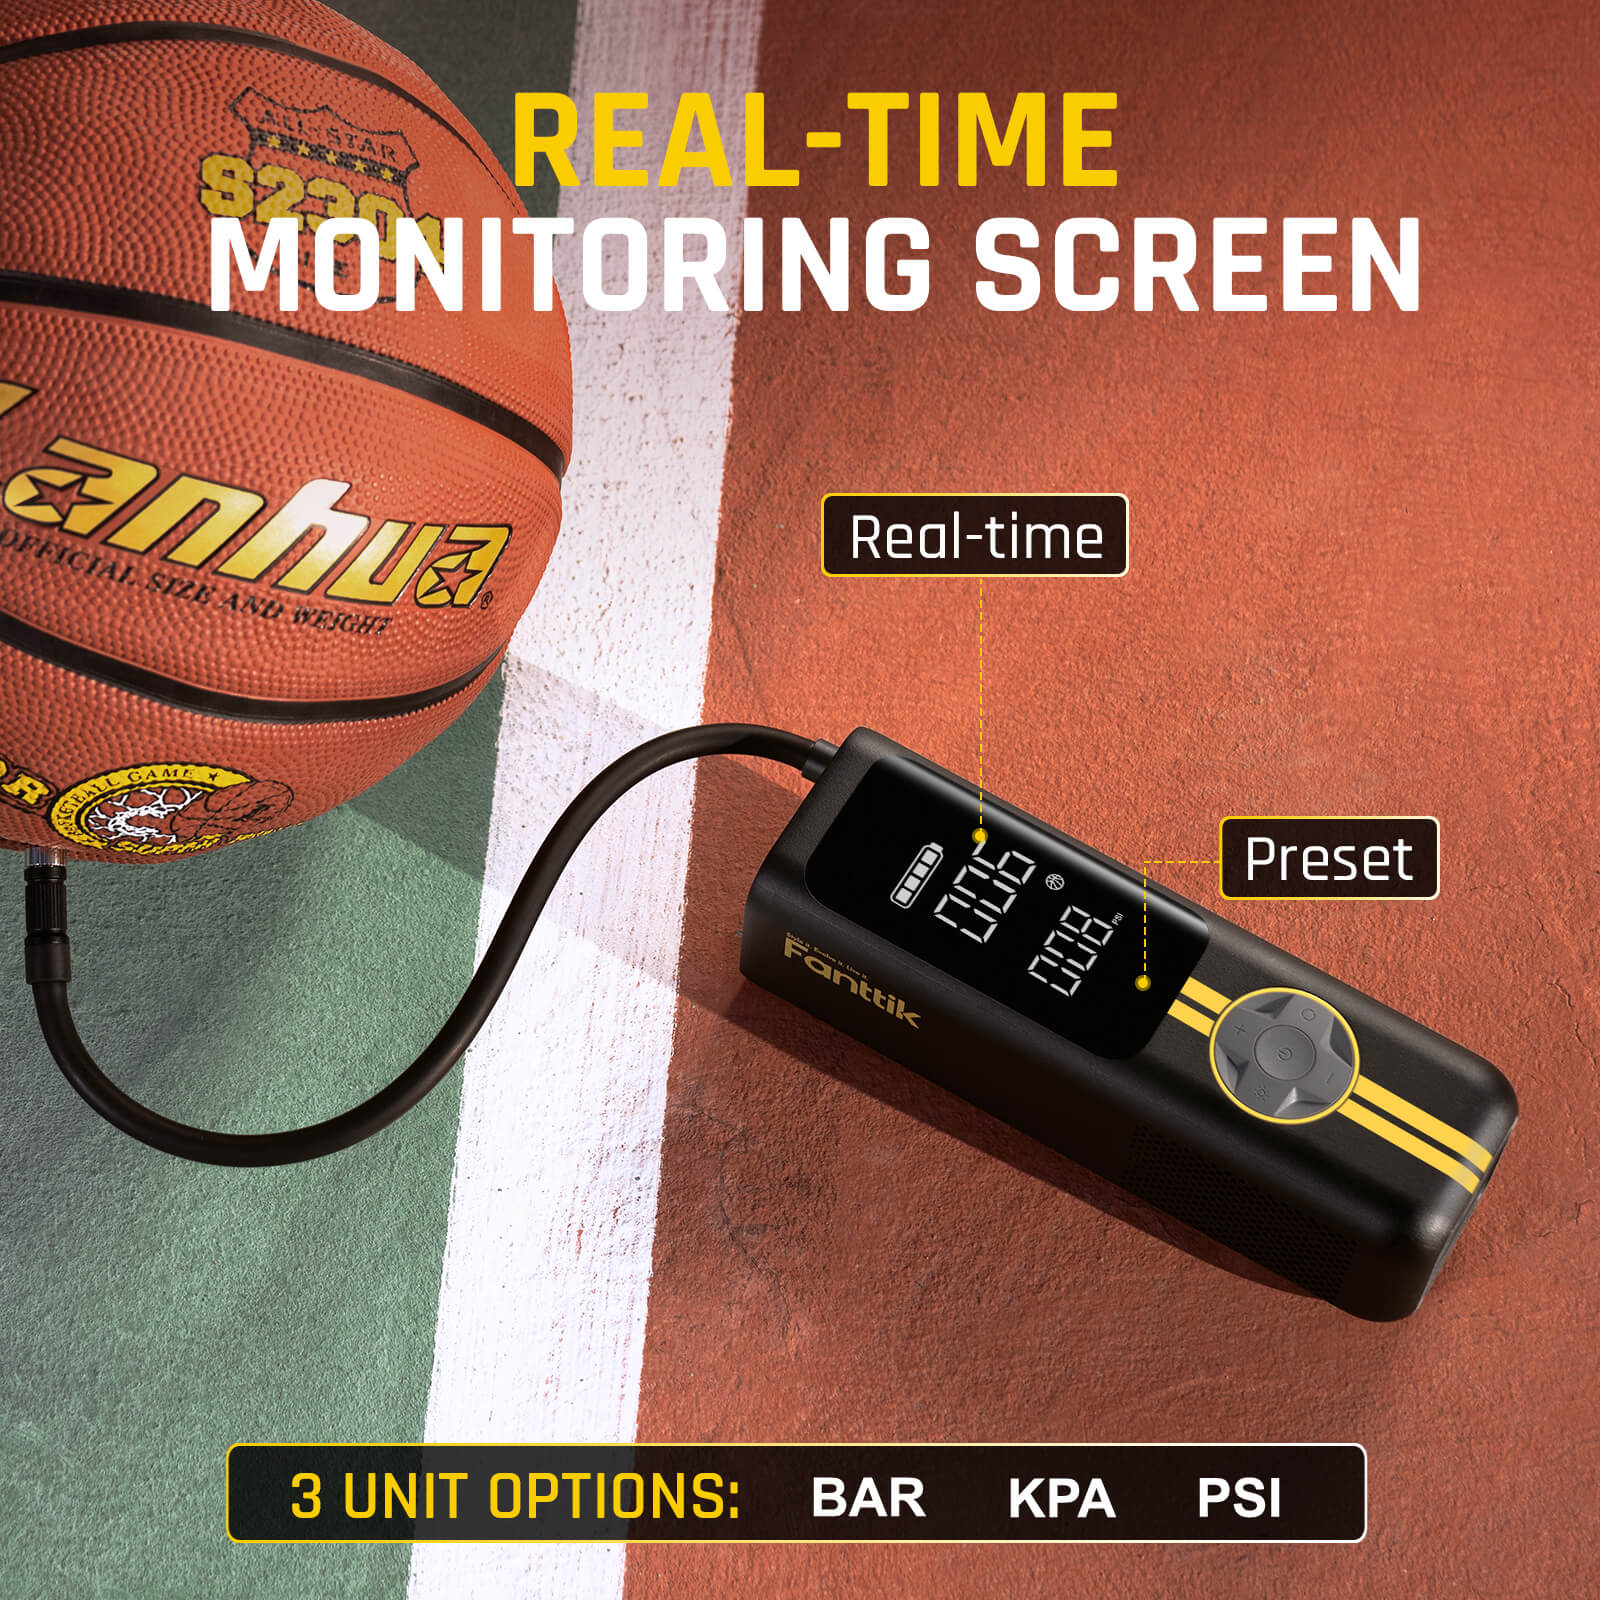 The large LCD dual display shows both real-time pressure value and preset value, convenient to read and observe the tire pressure status